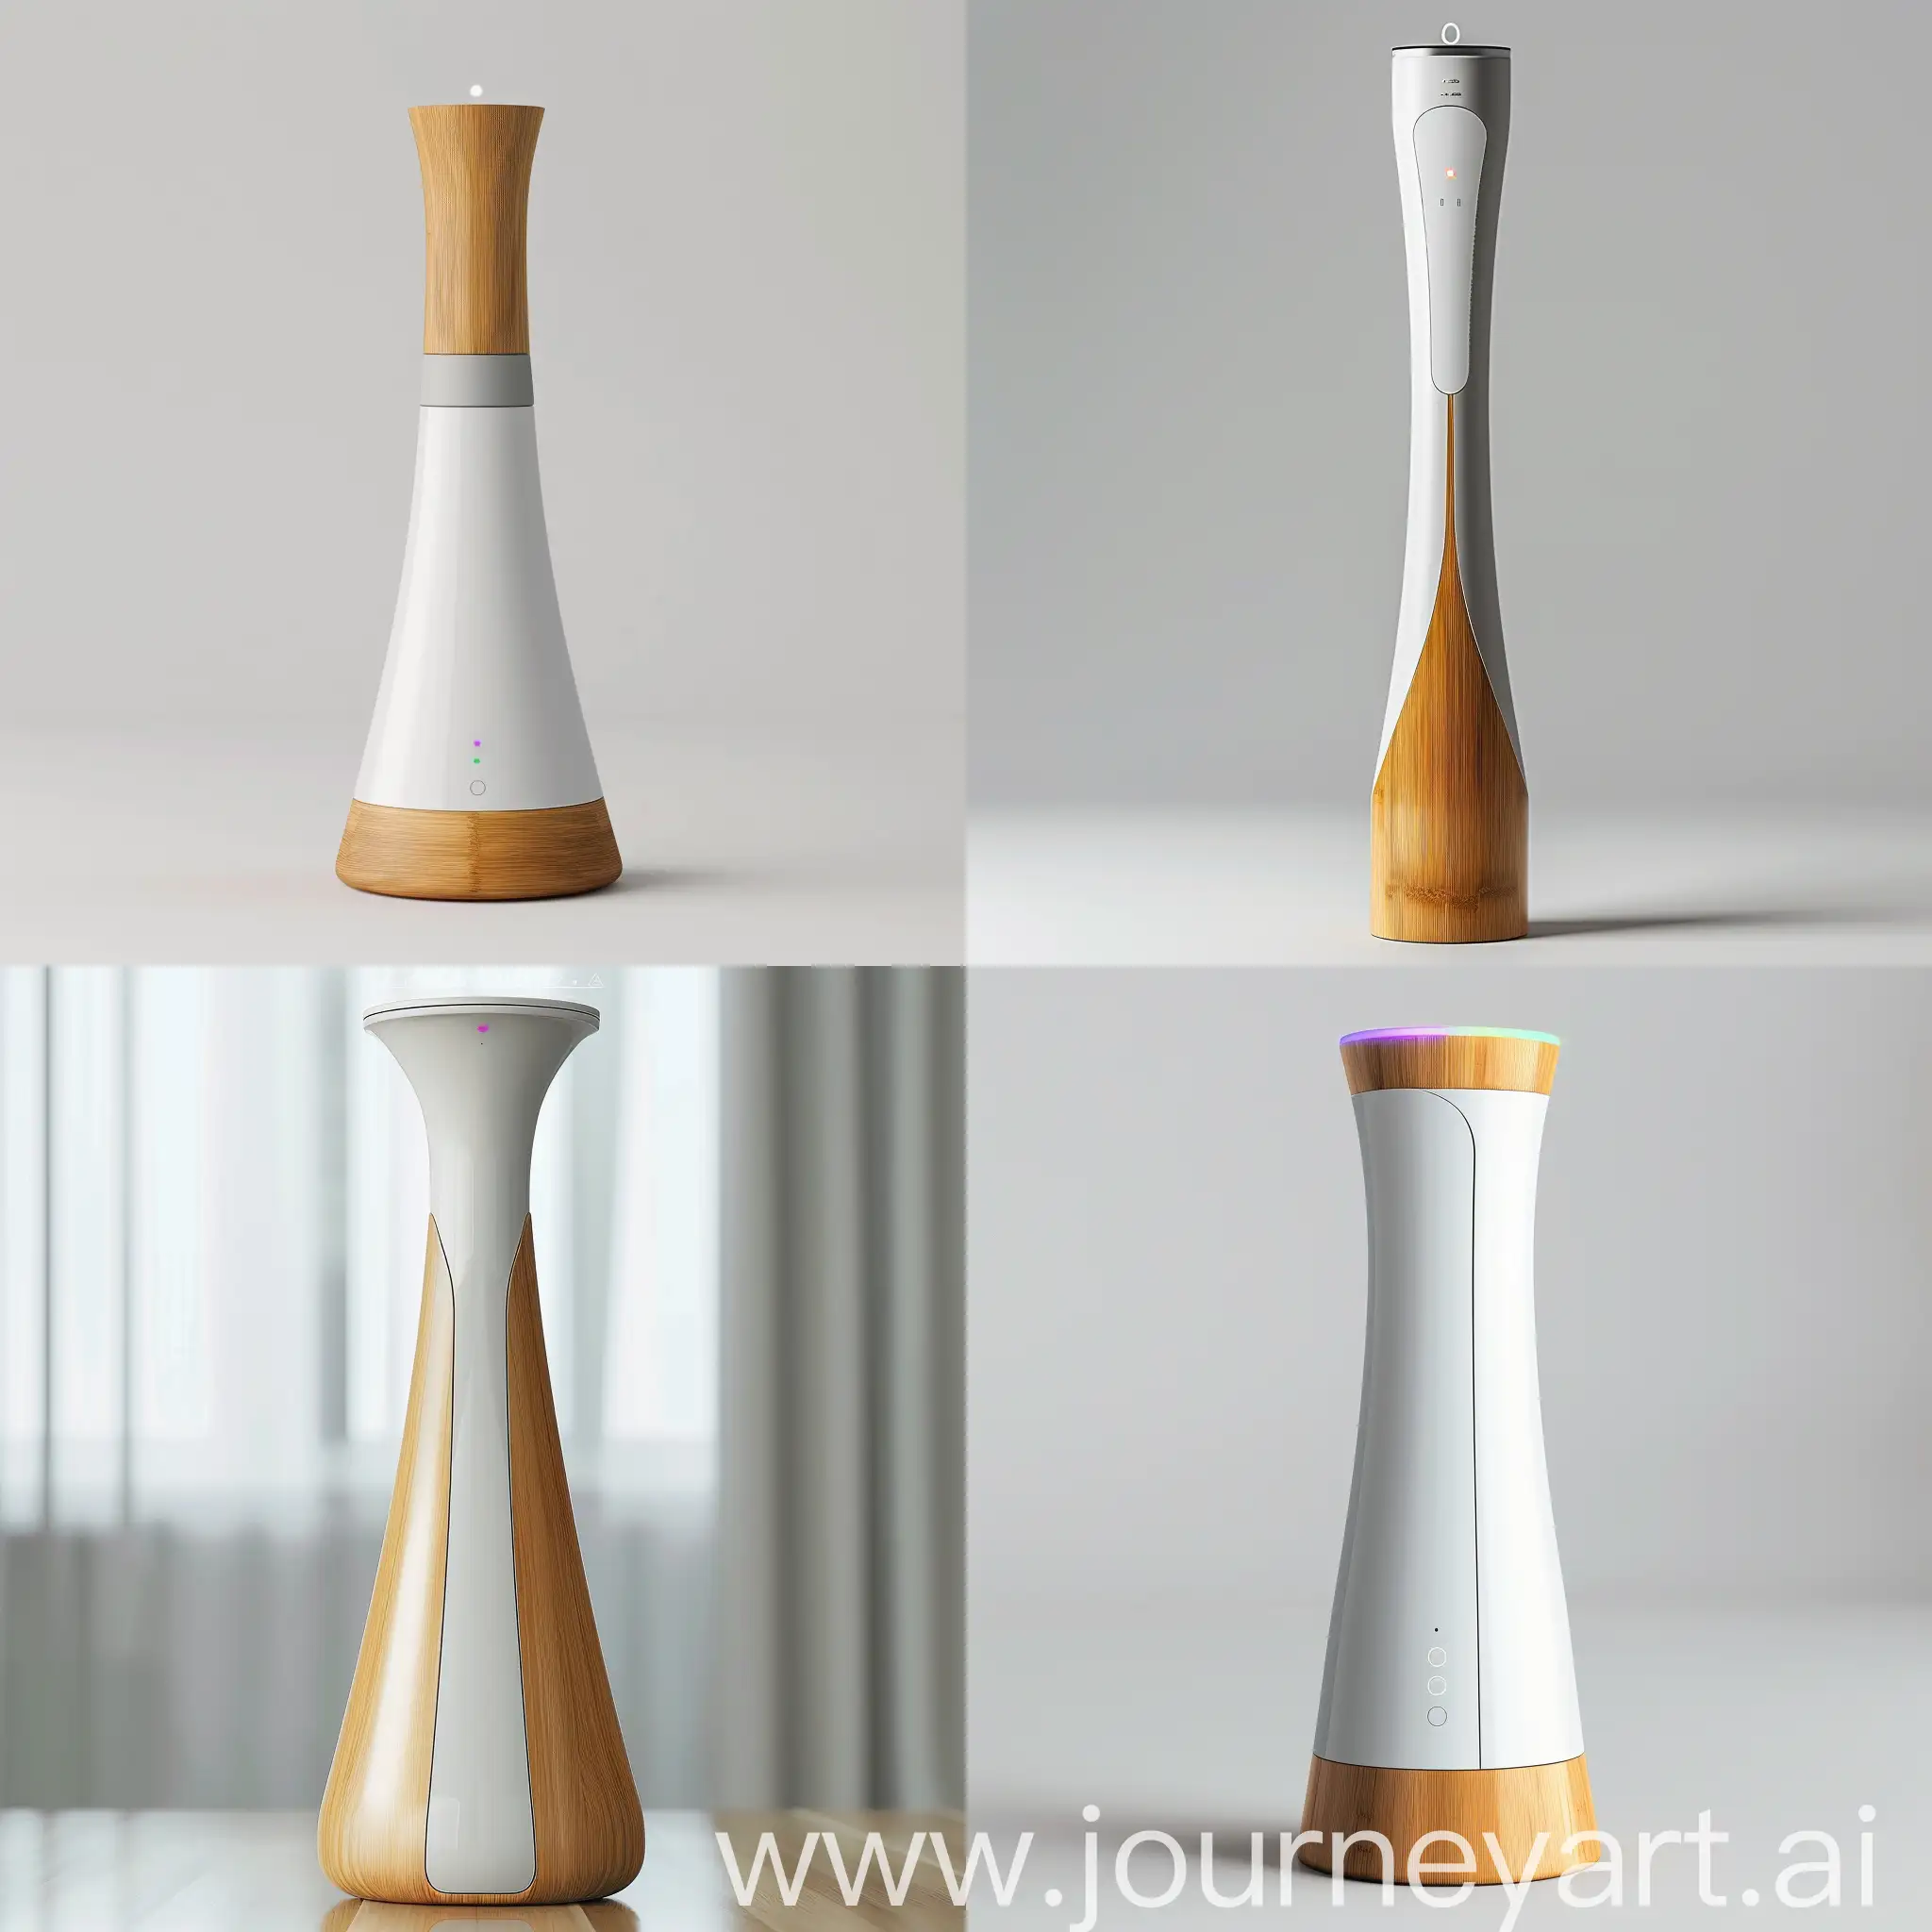 "Visualize a sleek, elegant energy management device, standing 30 cm tall with a form tapering from 8 cm at the base to 5 cm at the top. The base is made of sustainable bamboo, introducing a warm, natural element into its design, while the body is crafted from high-quality recycled plastics in a neutral white or light gray, embodying modern sustainability. At the top, a subtle LED light tag provides ambient lighting and notifications, changing colors according to the device’s status. The device's minimalist design is complemented by a discrete touch-sensitive area for basic interactions, seamlessly integrated into the body without disturbing the clean lines. This design epitomizes eco-friendly elegance and modern technology, fitting seamlessly into contemporary smart homes."realistic style